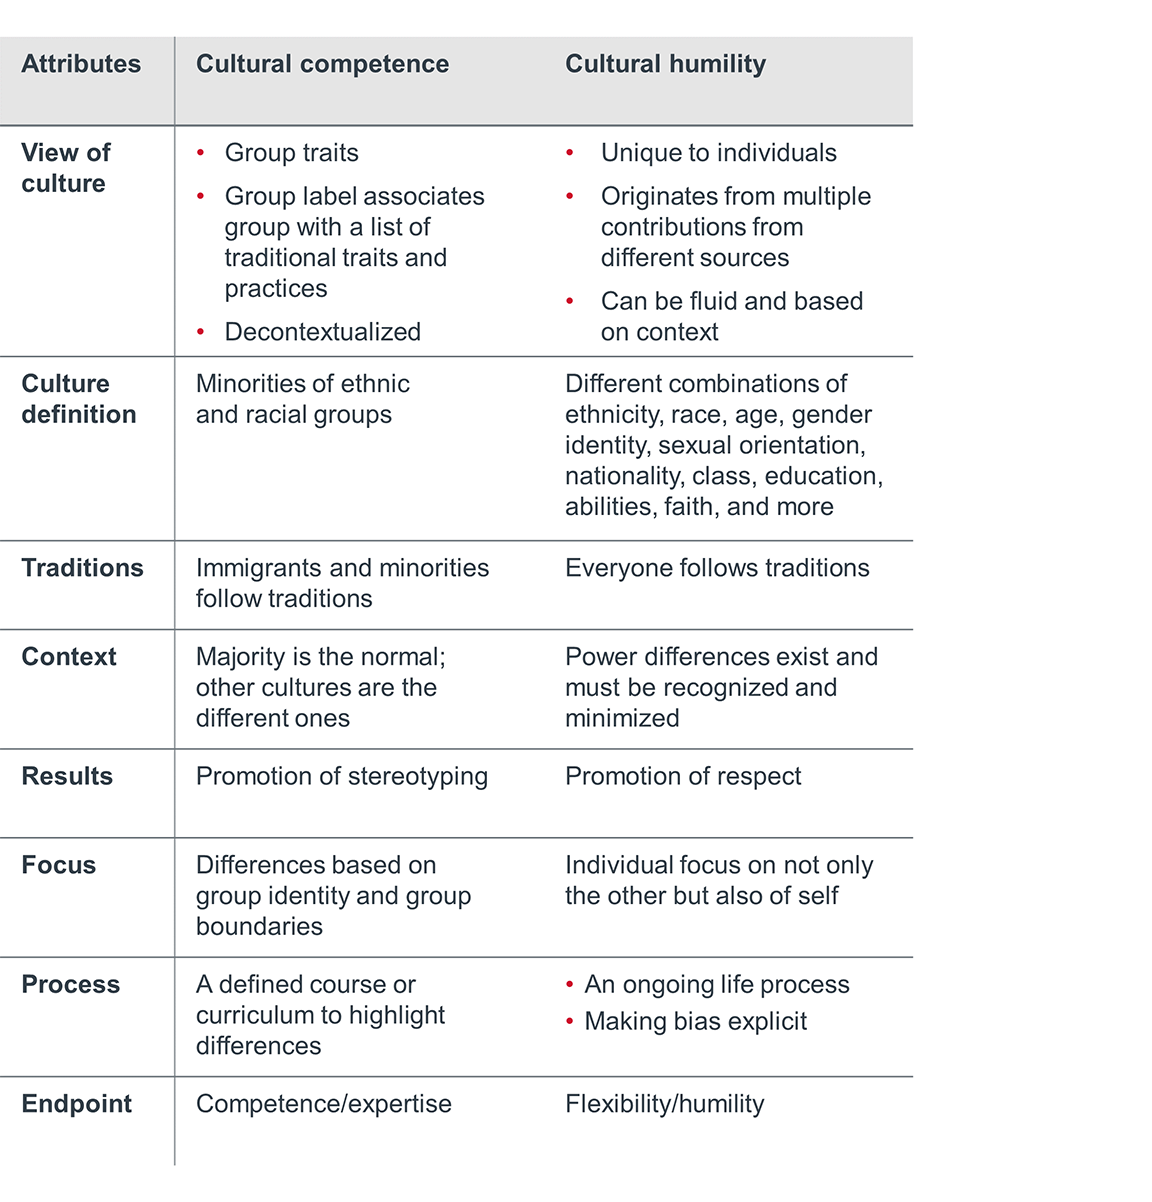 cultural competency and humility comparison